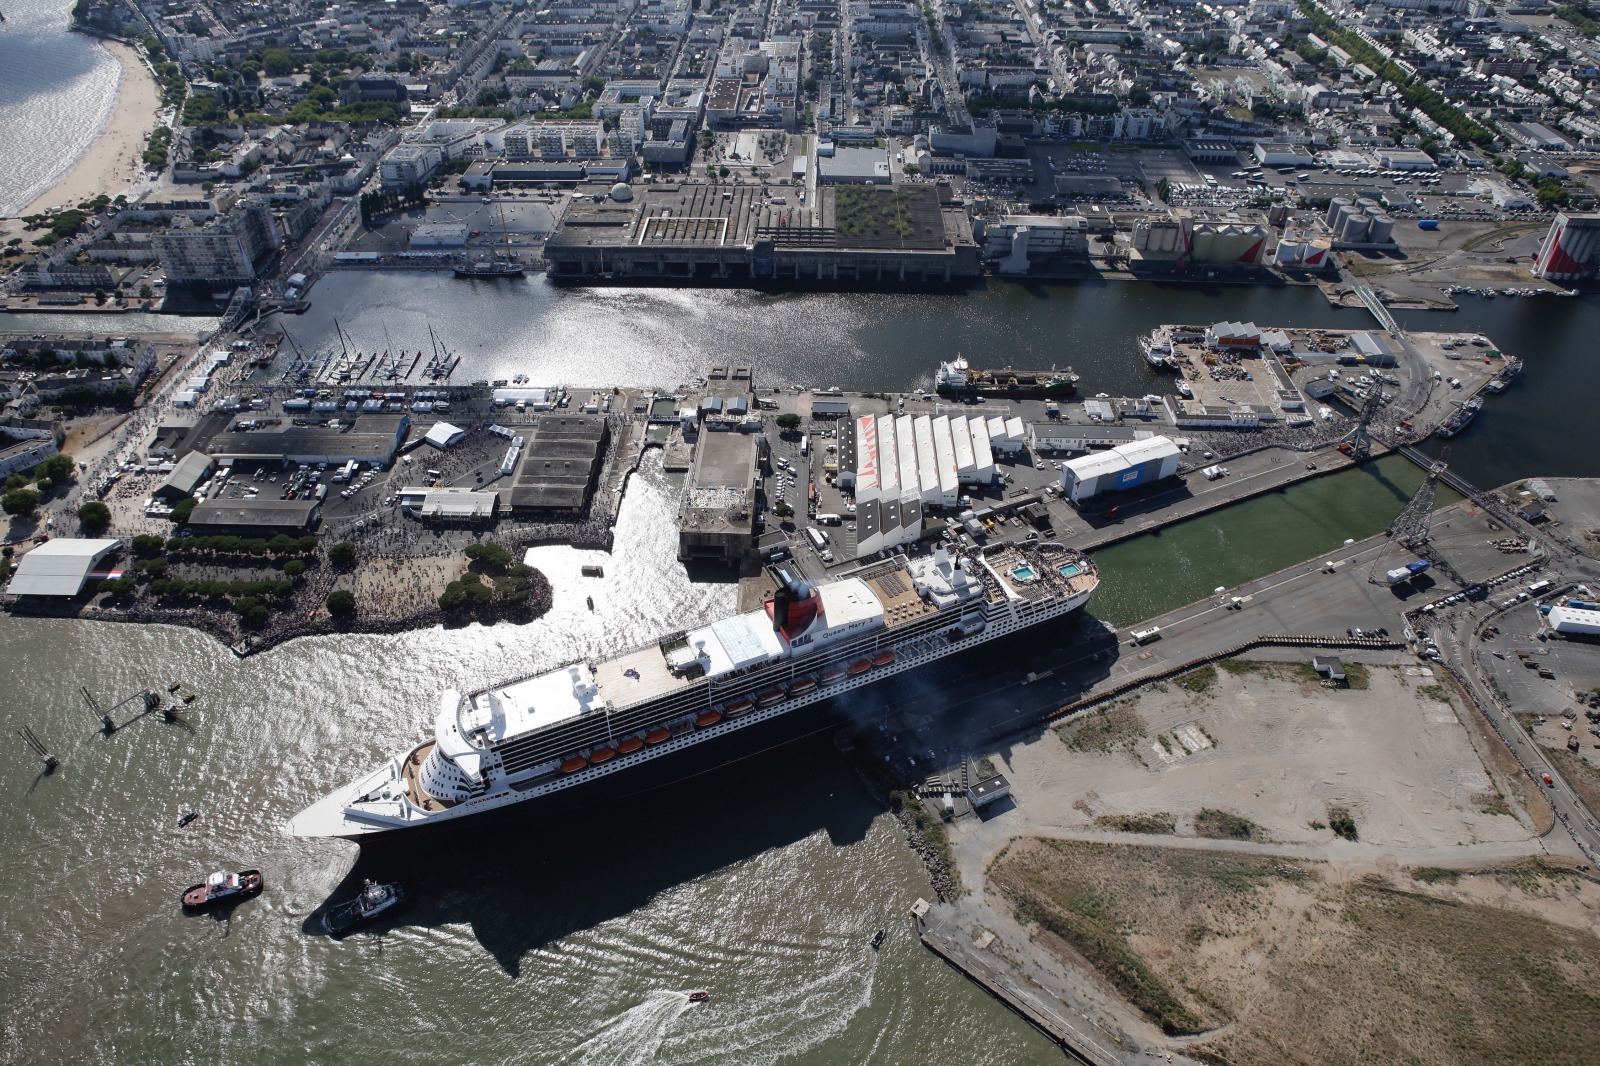 Queen Mary 2 departing Saint Nazaire for sea trials in September 2003.